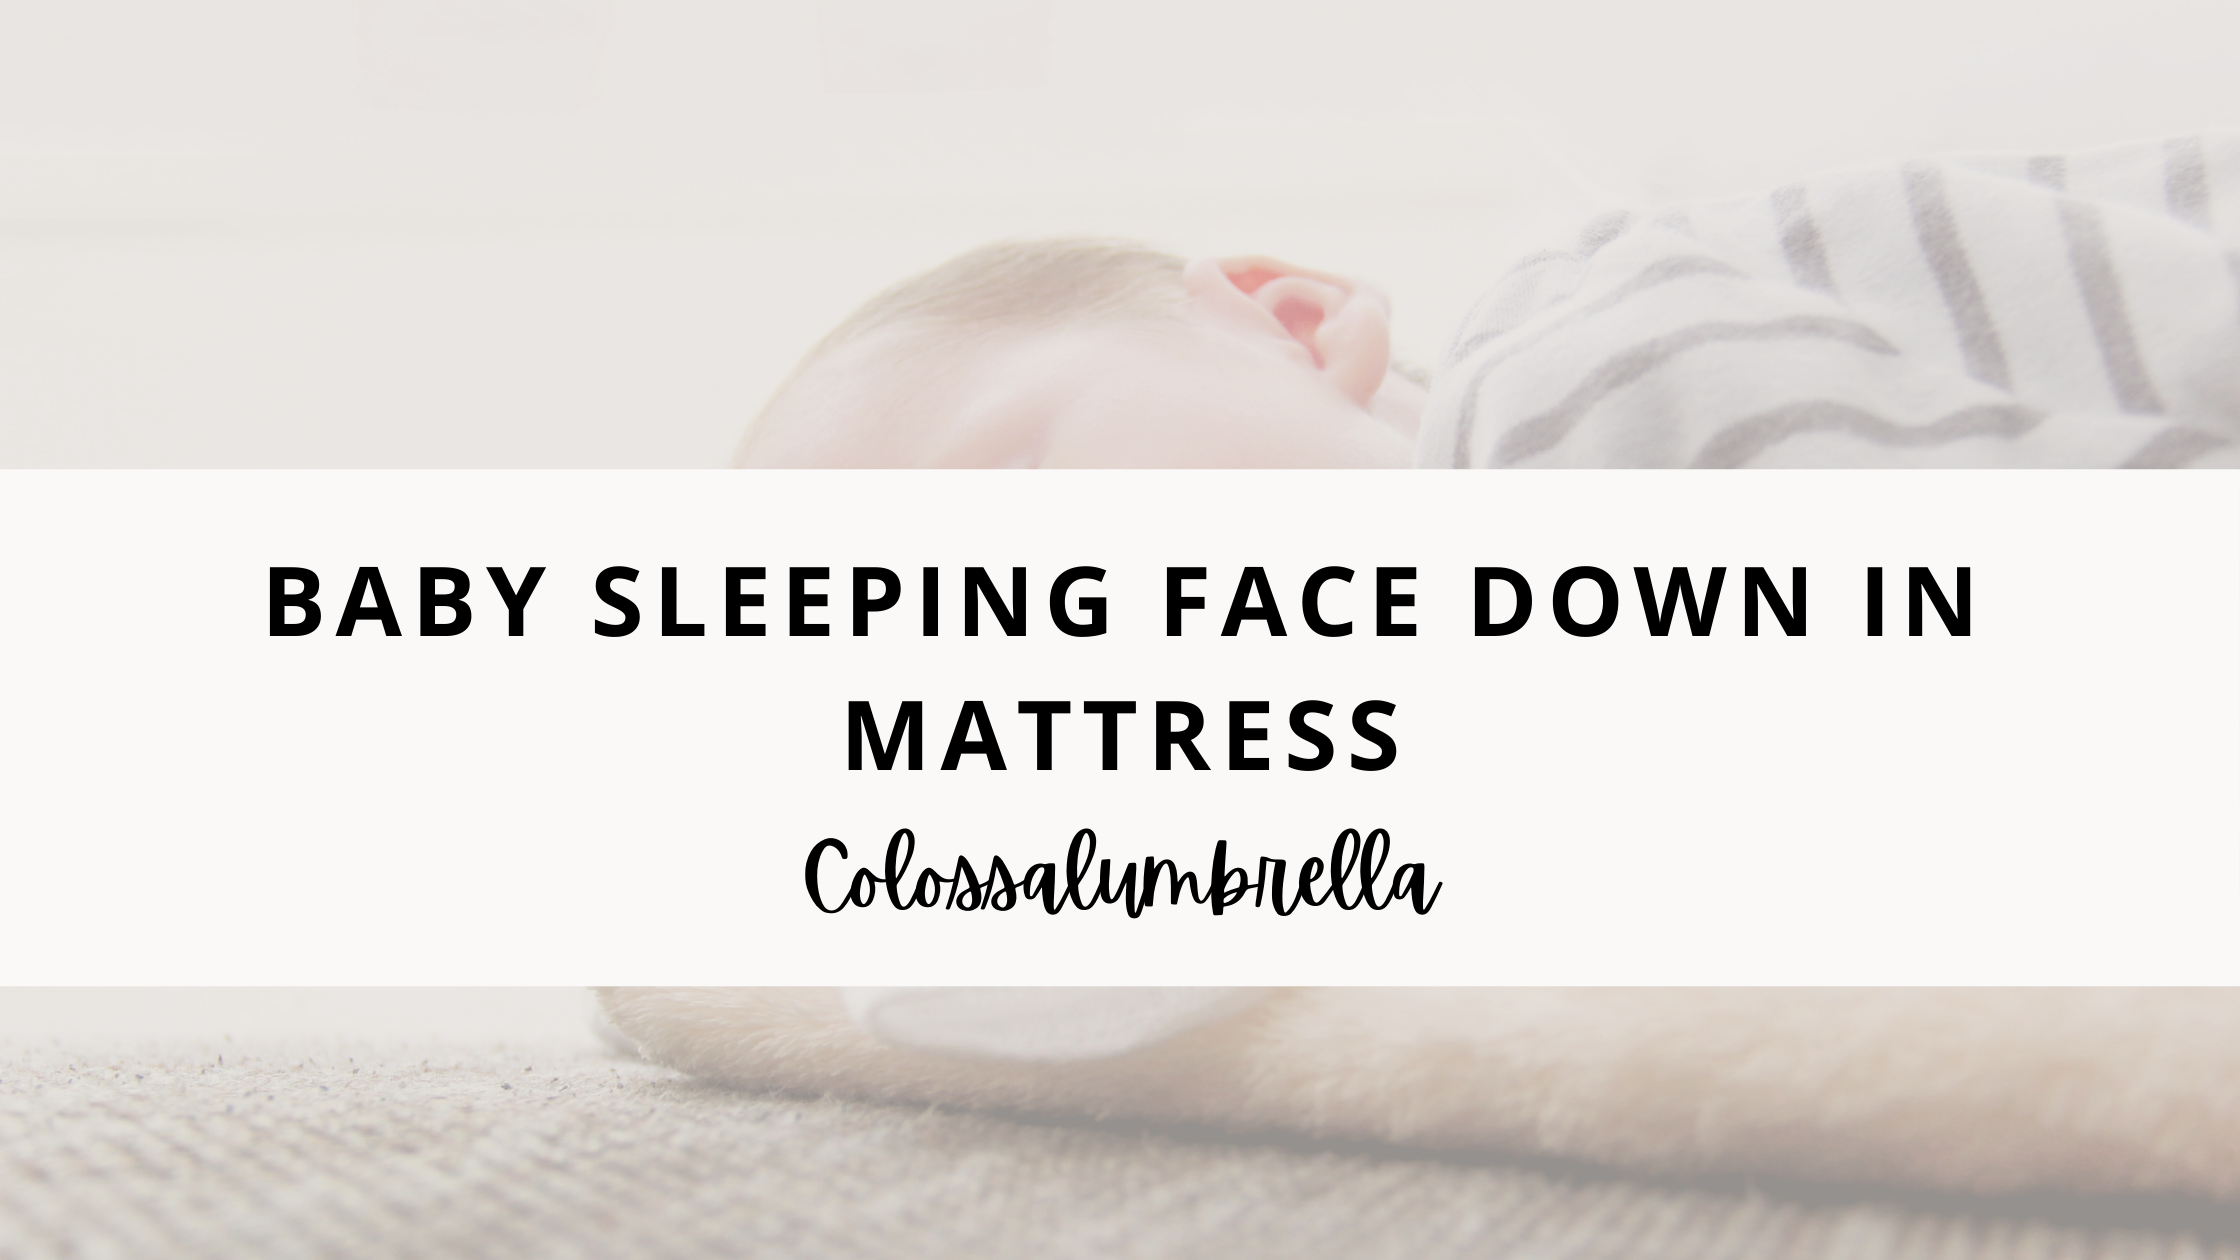 Is baby sleeping face down in mattress a safe sleeping position for your Baby?